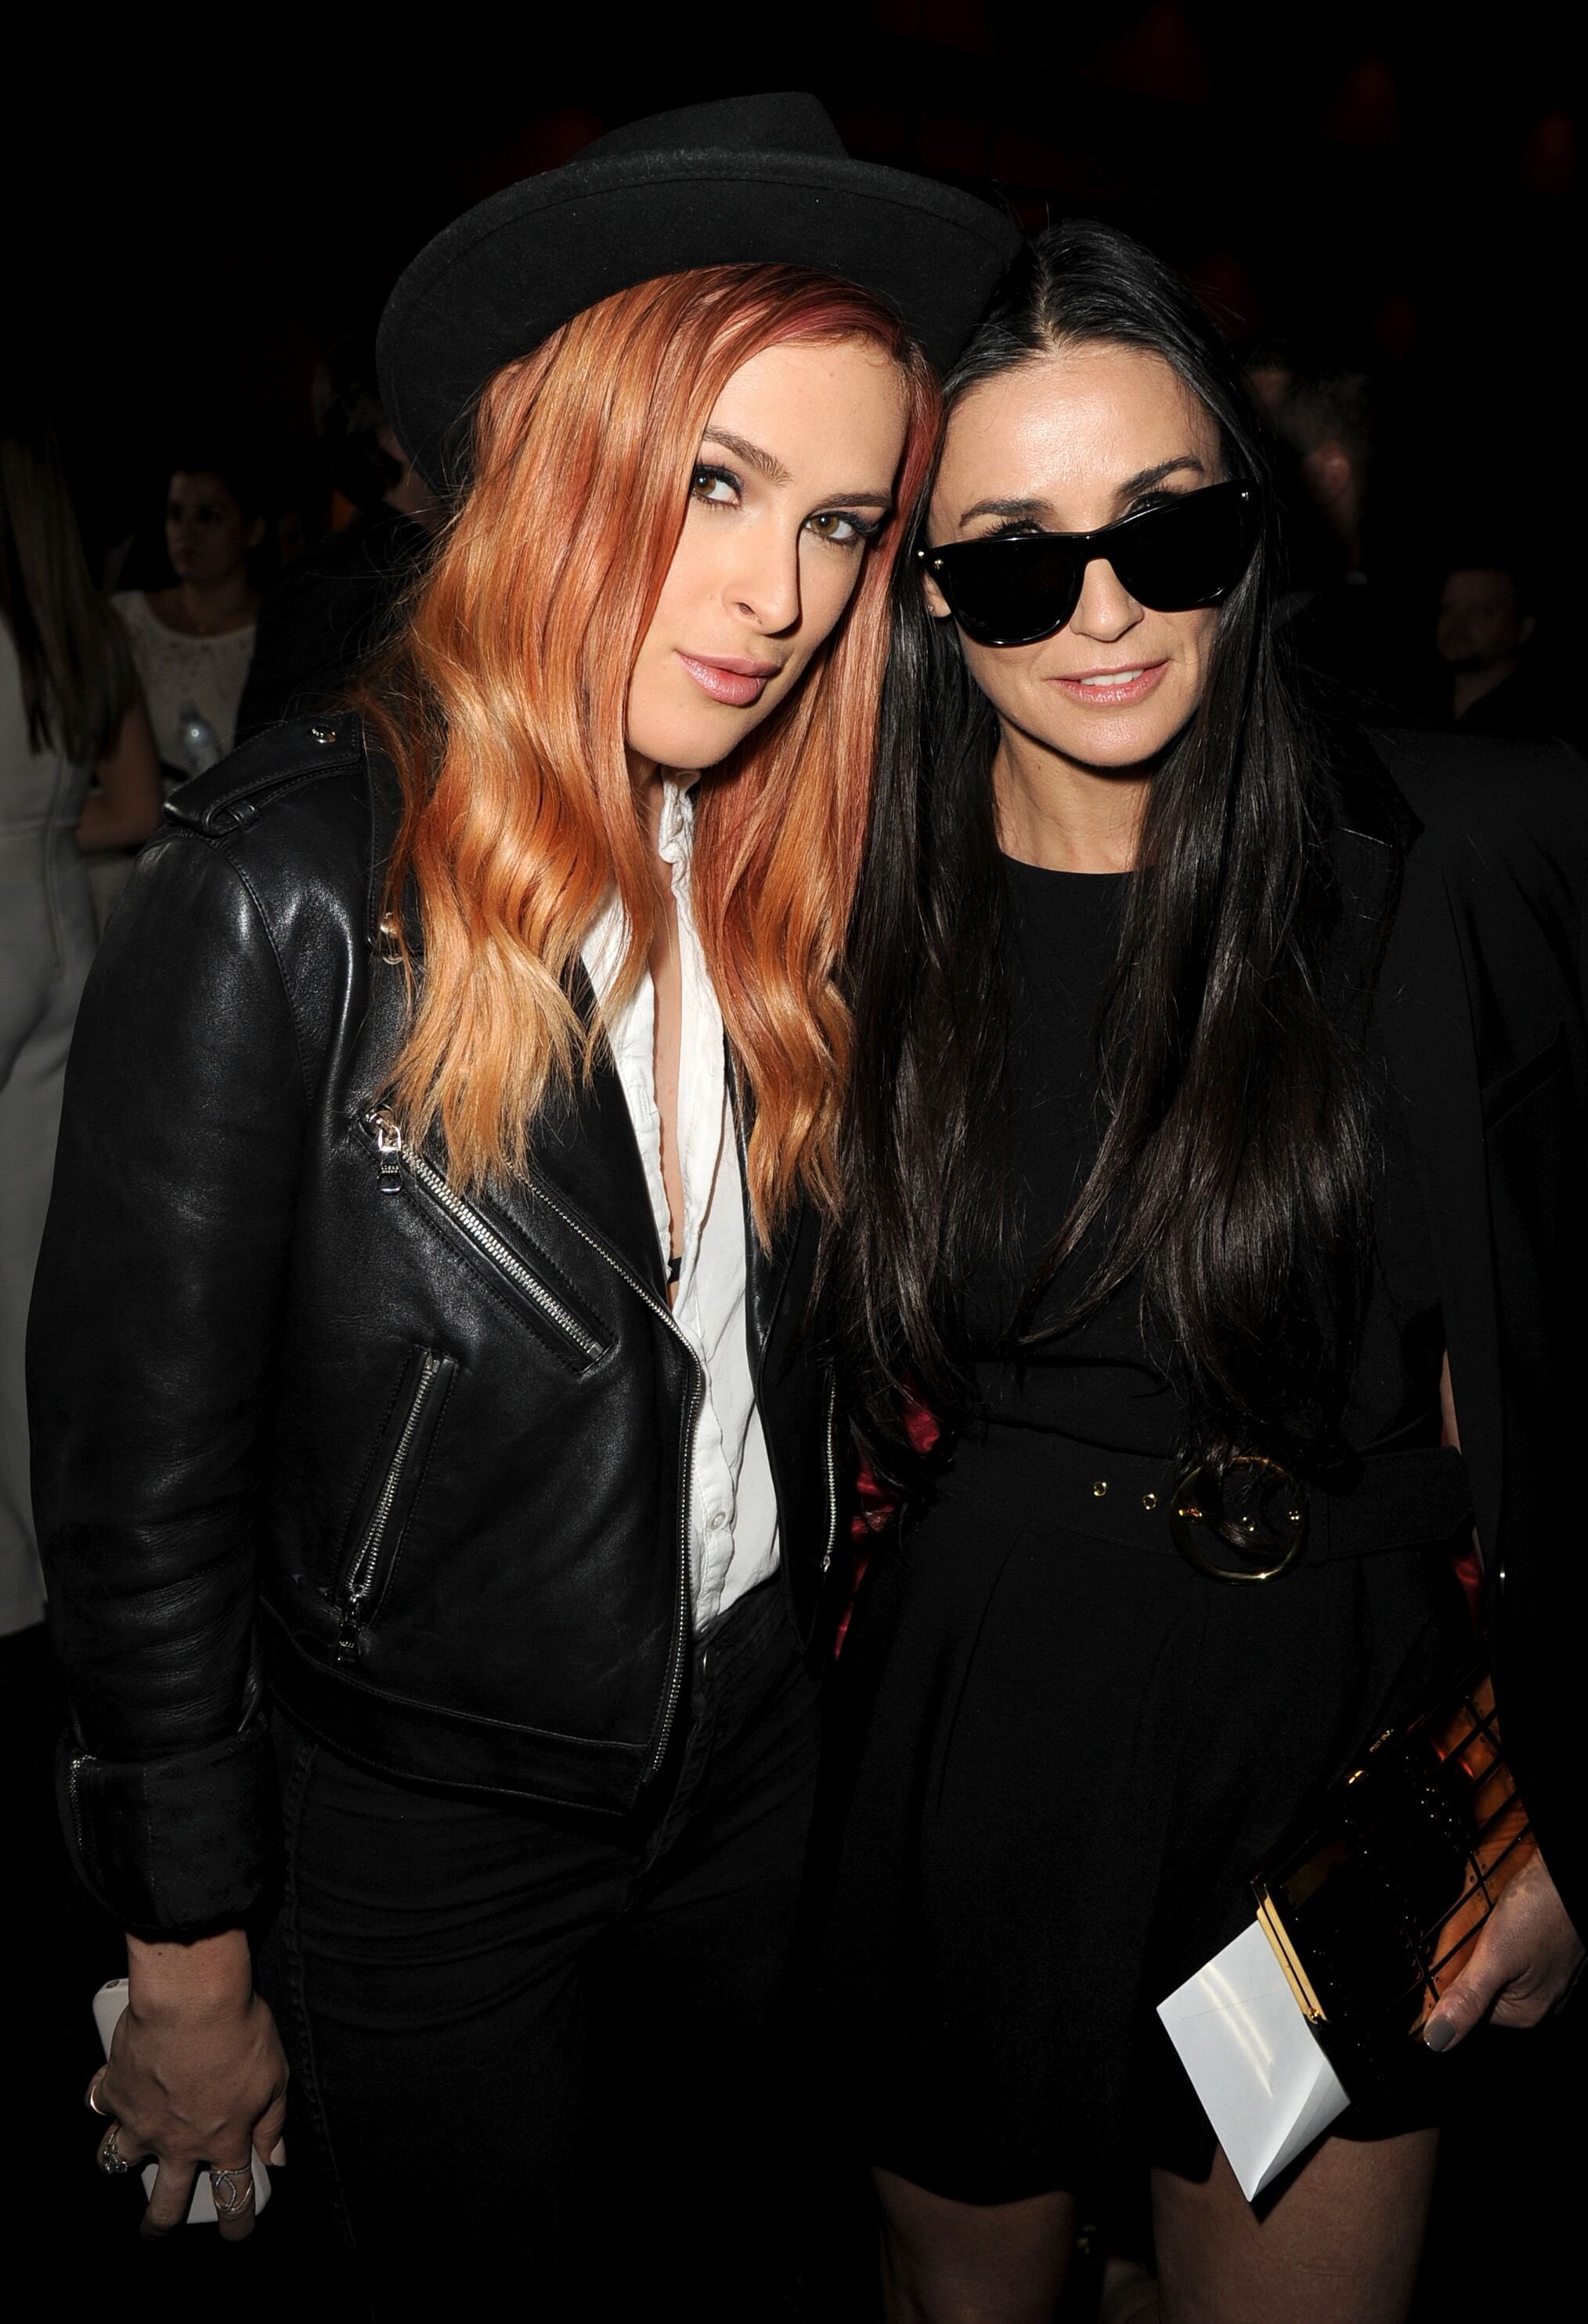  Rumer Willis and Demi Moore at the premiere of "Palo Alto" in Los Angeles in 2014